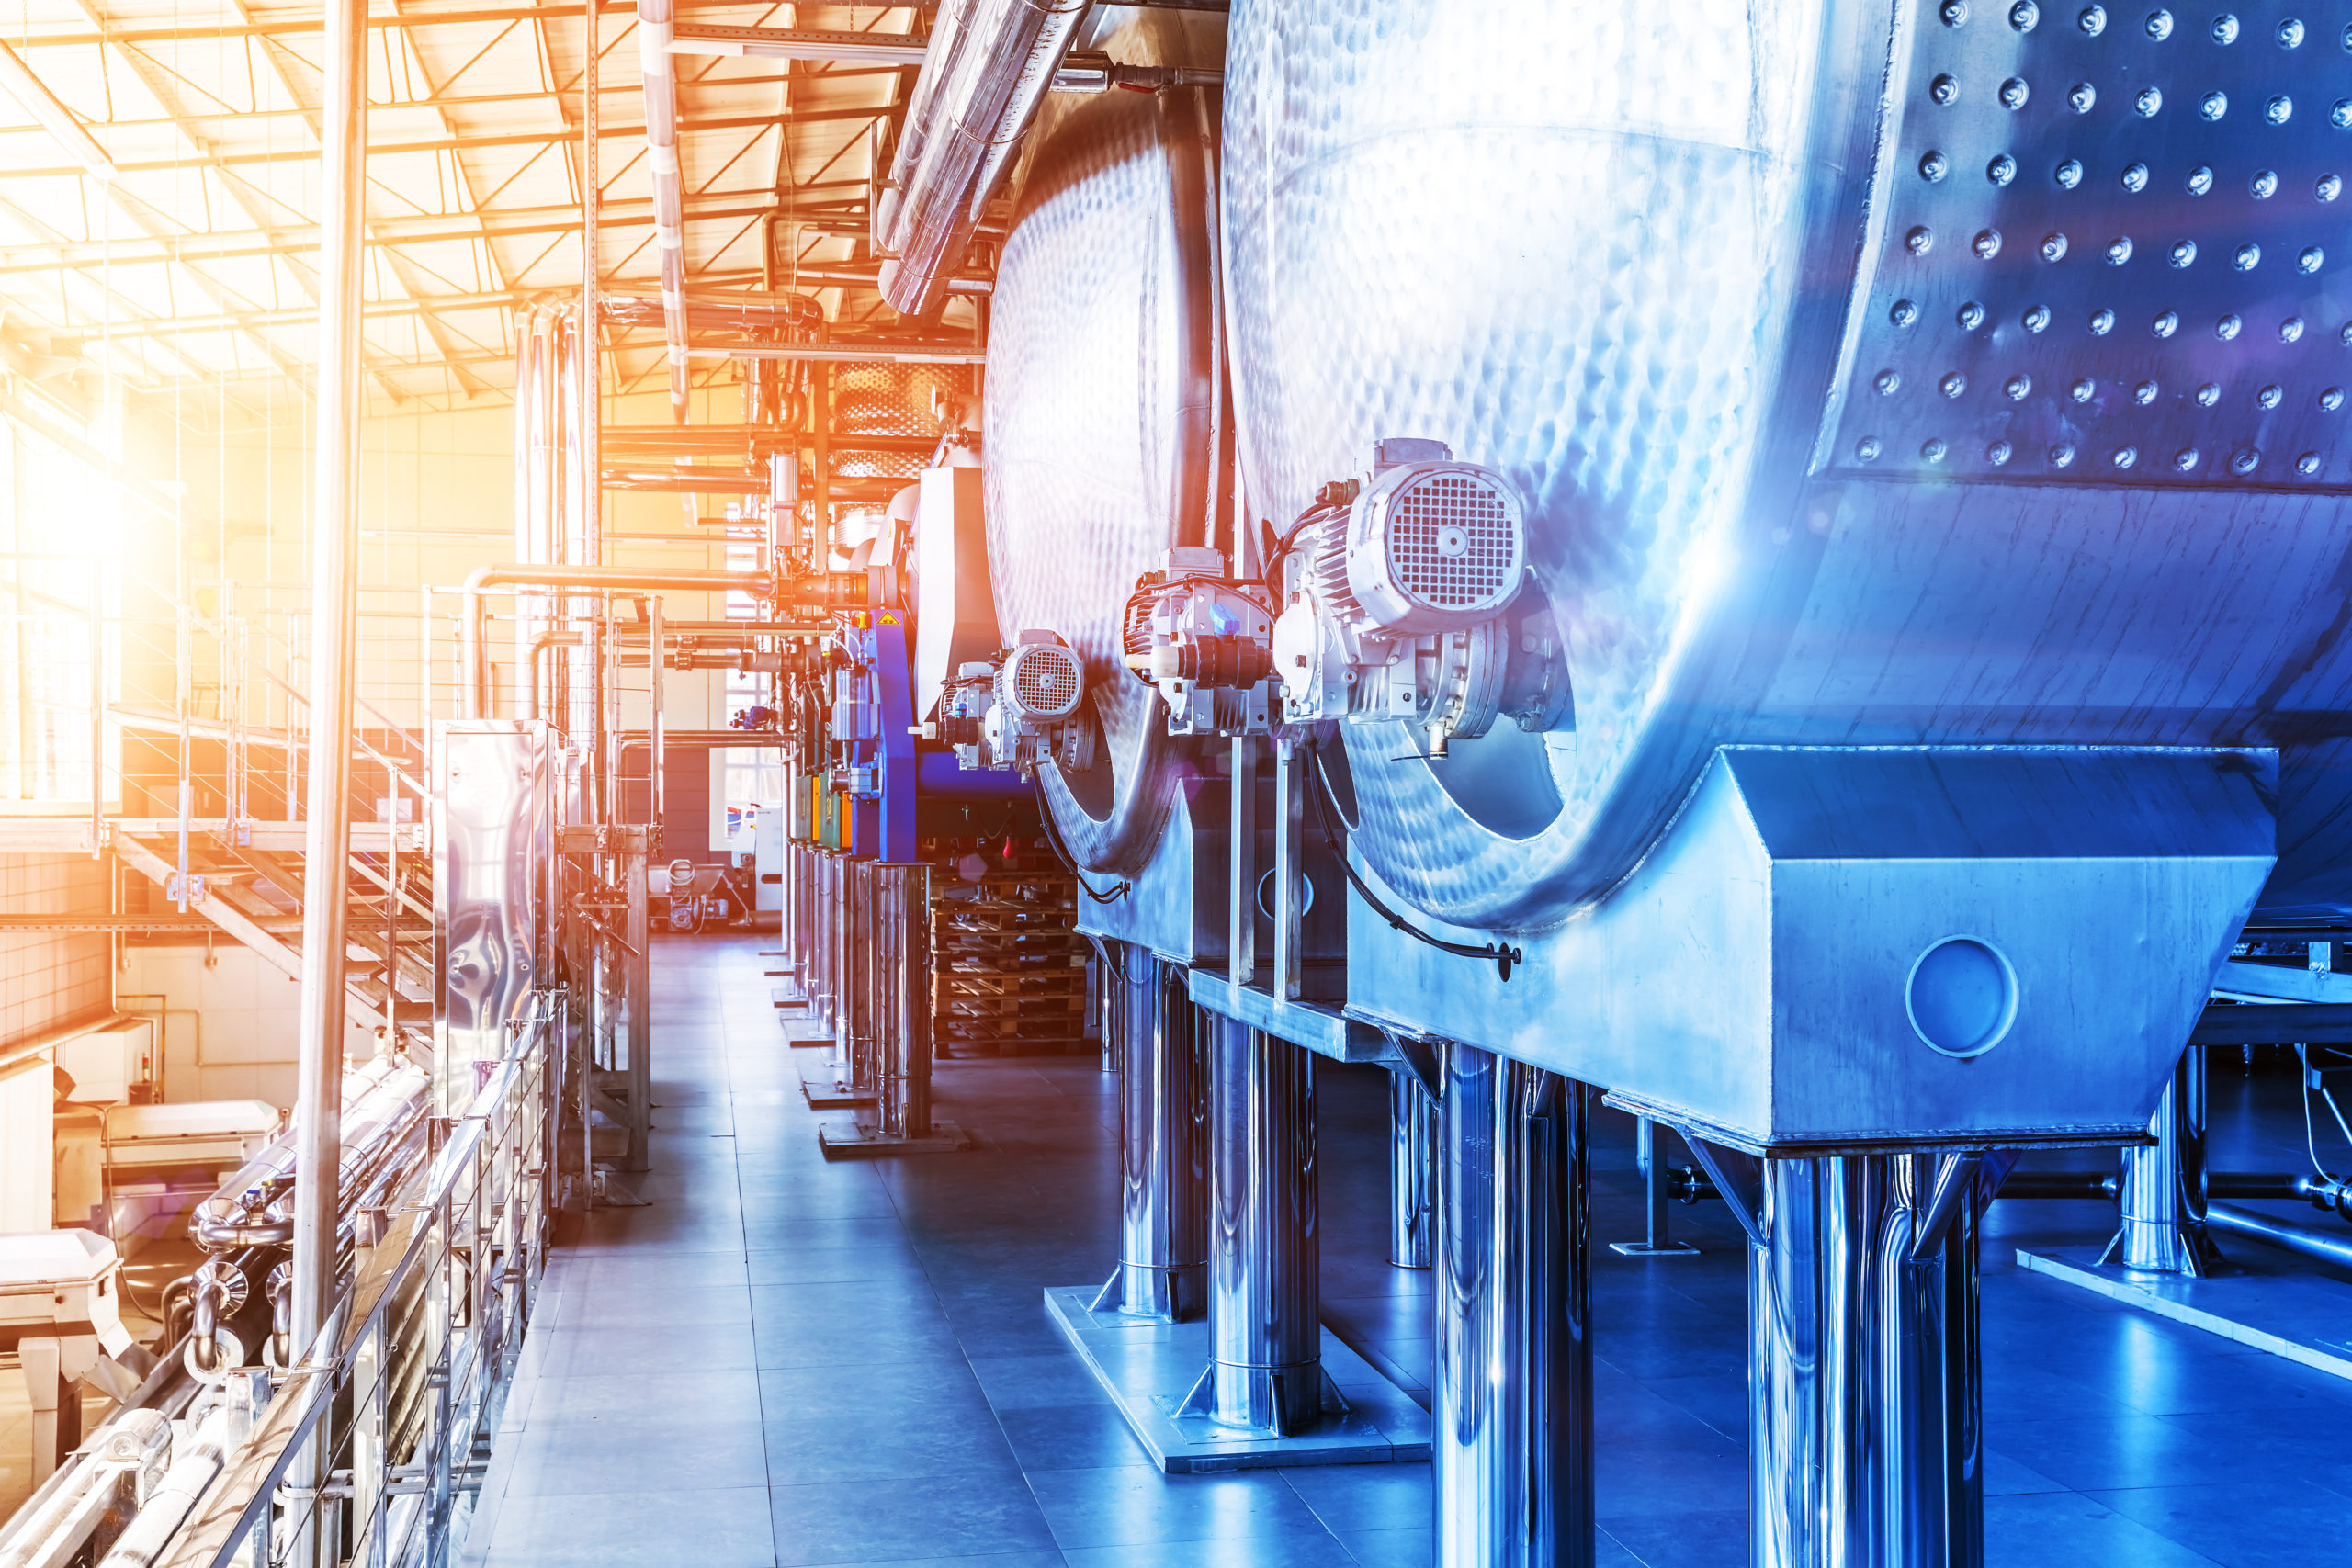 A major manufacturer and distributor of industrial chemicals partners with Thrive to grow its IT infrastructure, enhance security, and increase employee security awareness.